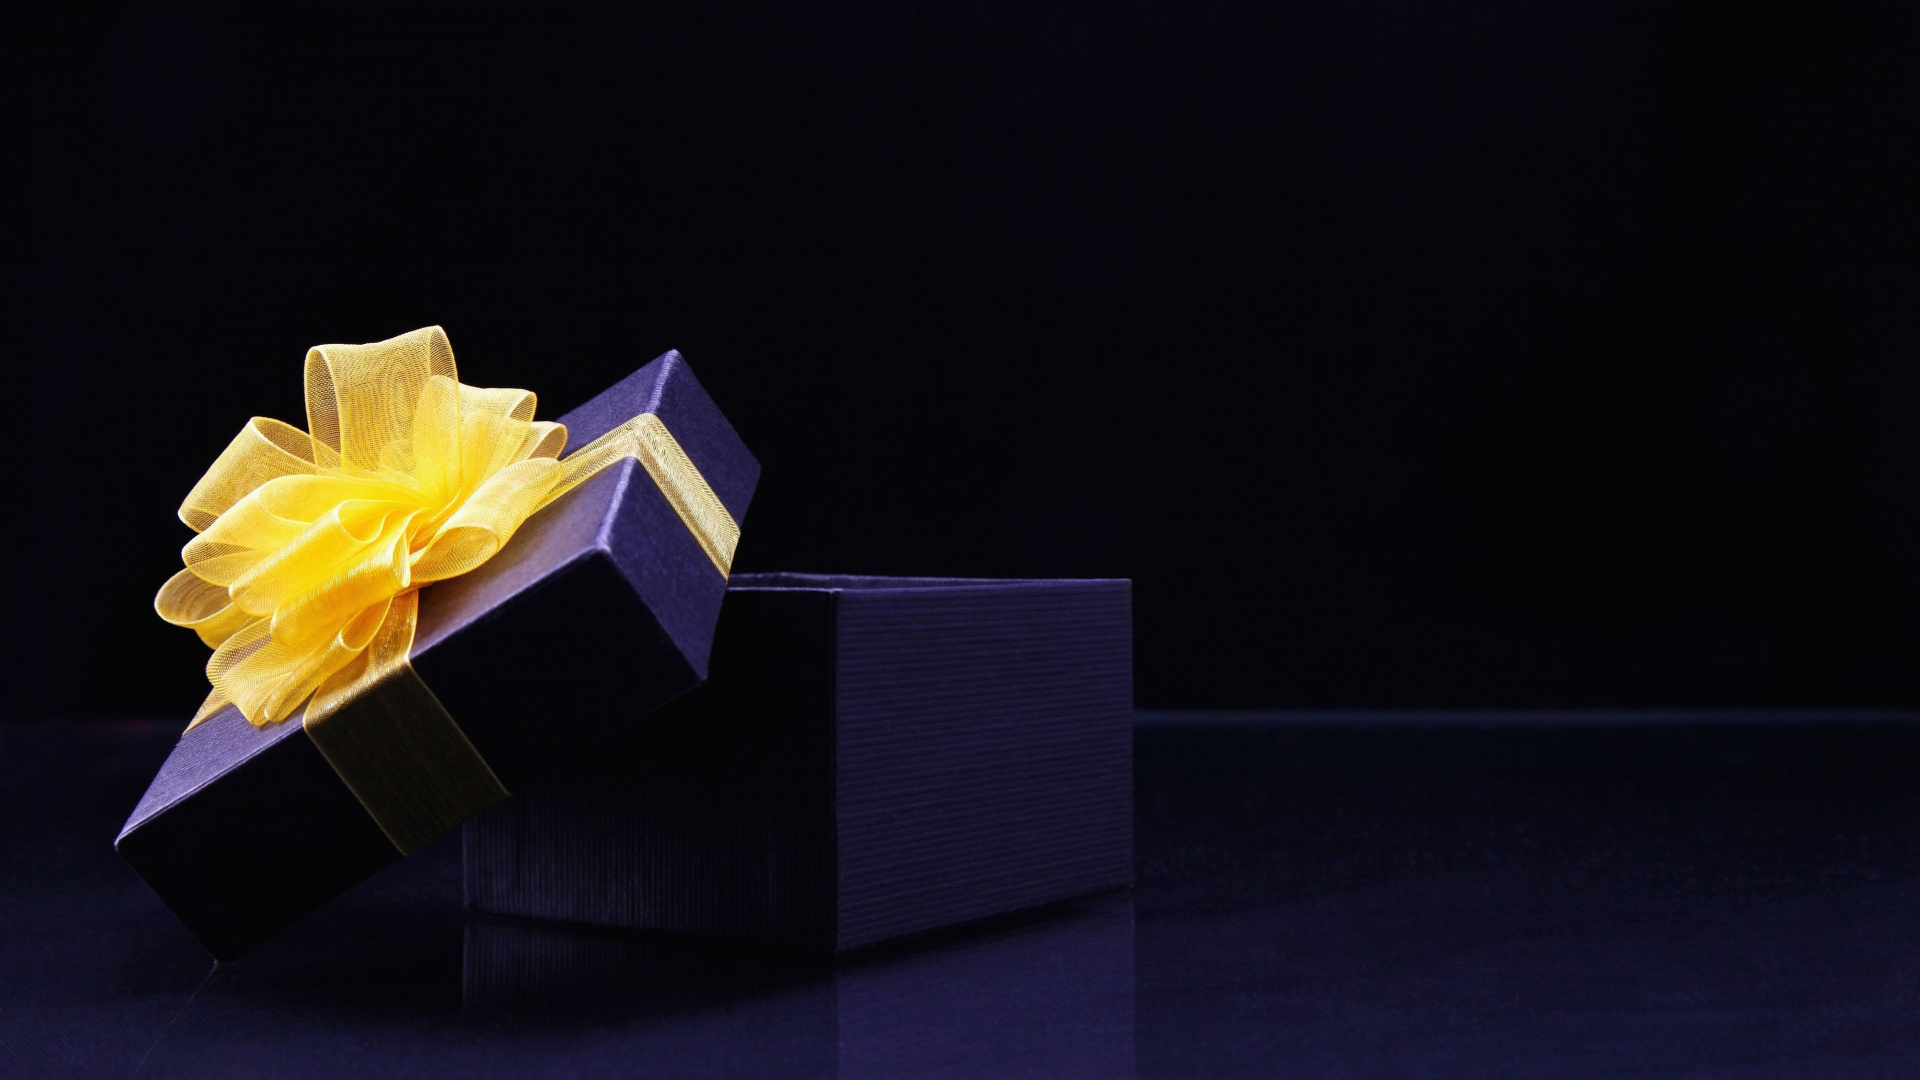 Gift, Christmas Gift, Origami, Light, Yellow. Wallpaper in 1920x1080 Resolution